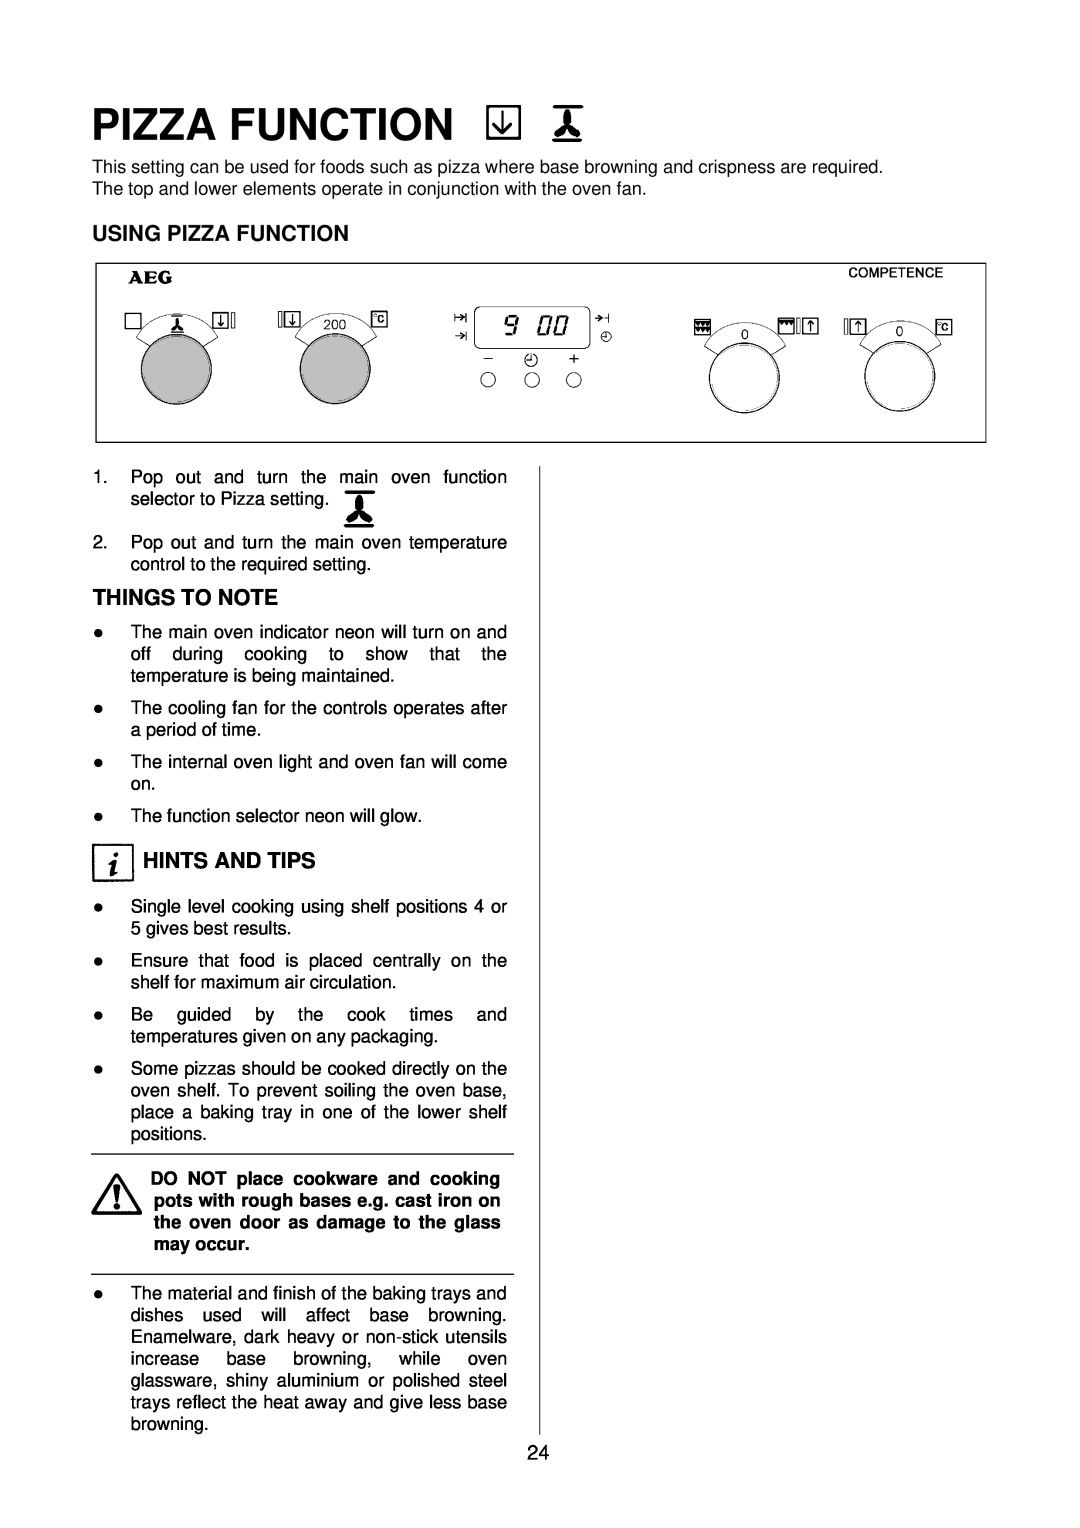 Electrolux D4100-1 operating instructions Using Pizza Function, Things To Note, Hints And Tips 